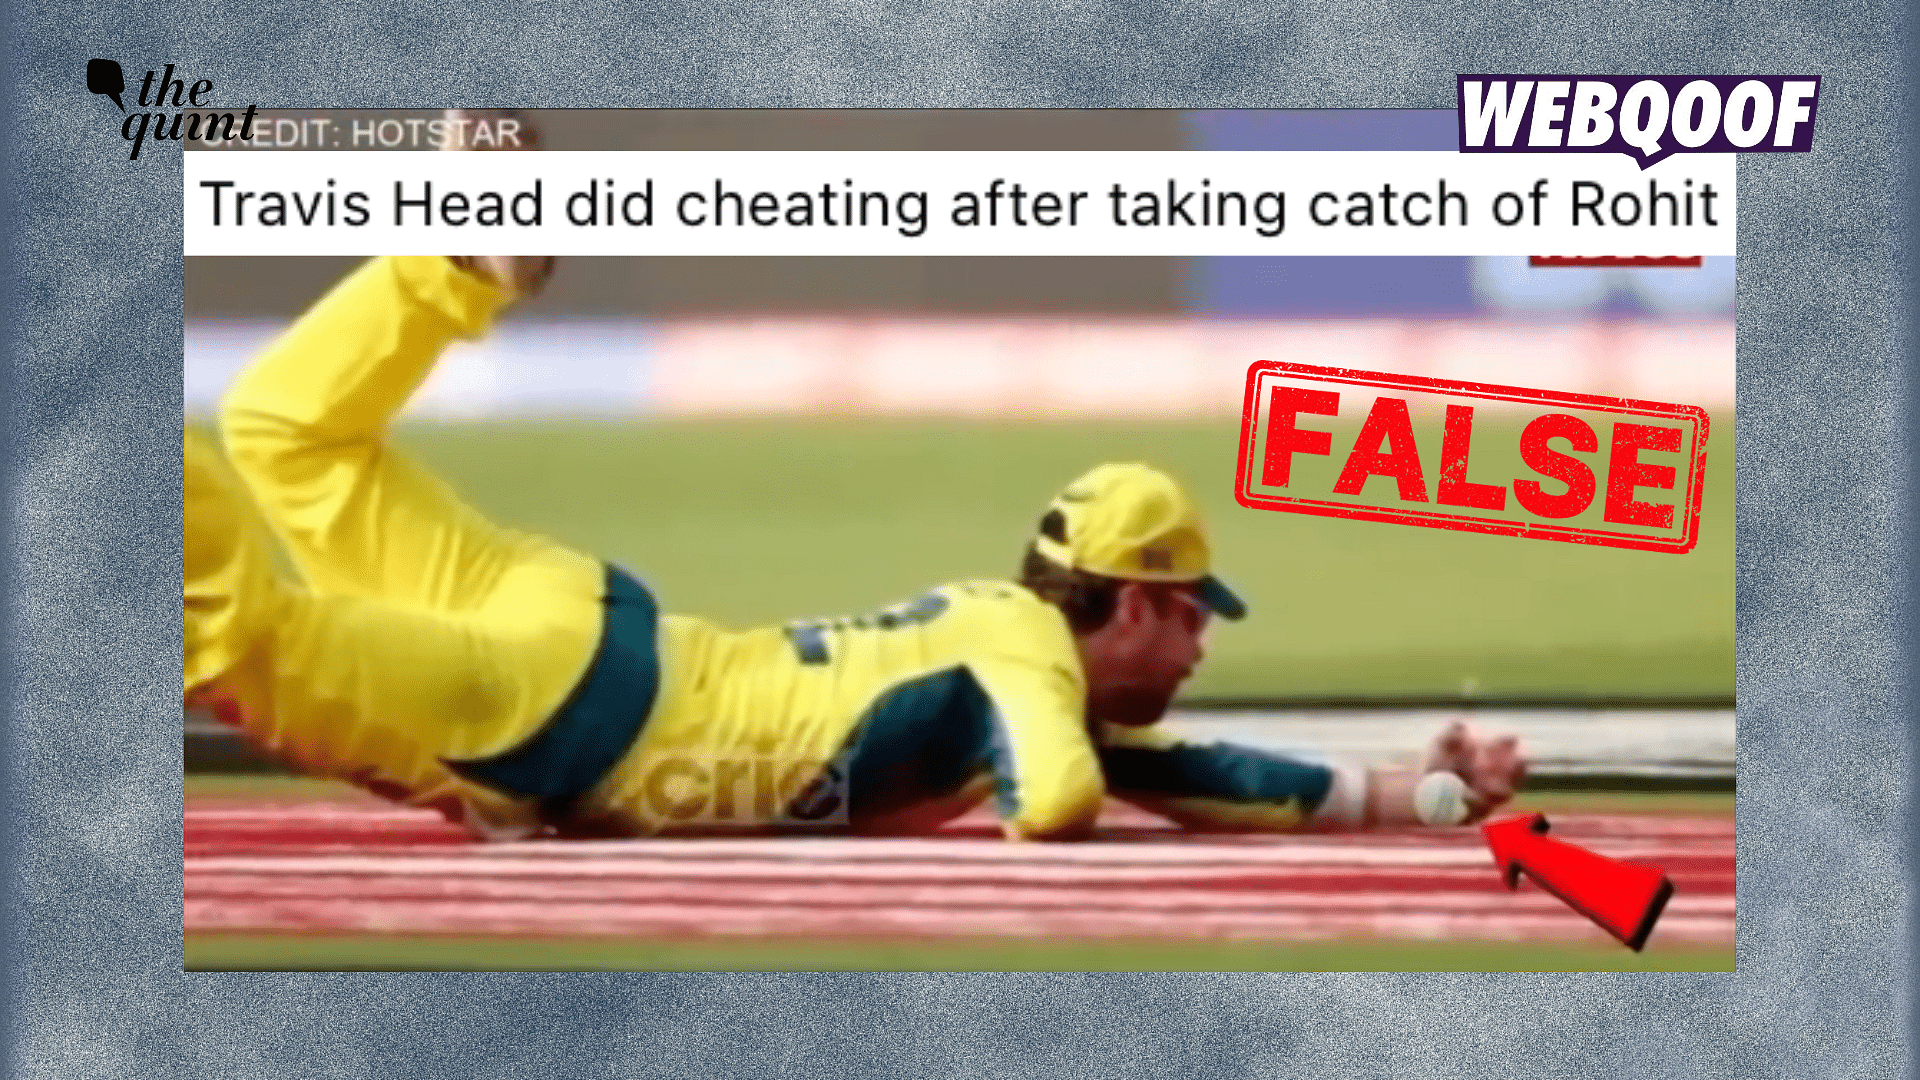 <div class="paragraphs"><p>An edited photo of Australian cricket Travis Head is being shared to falsely accuse him of cheating during the cricket match against India.</p></div>